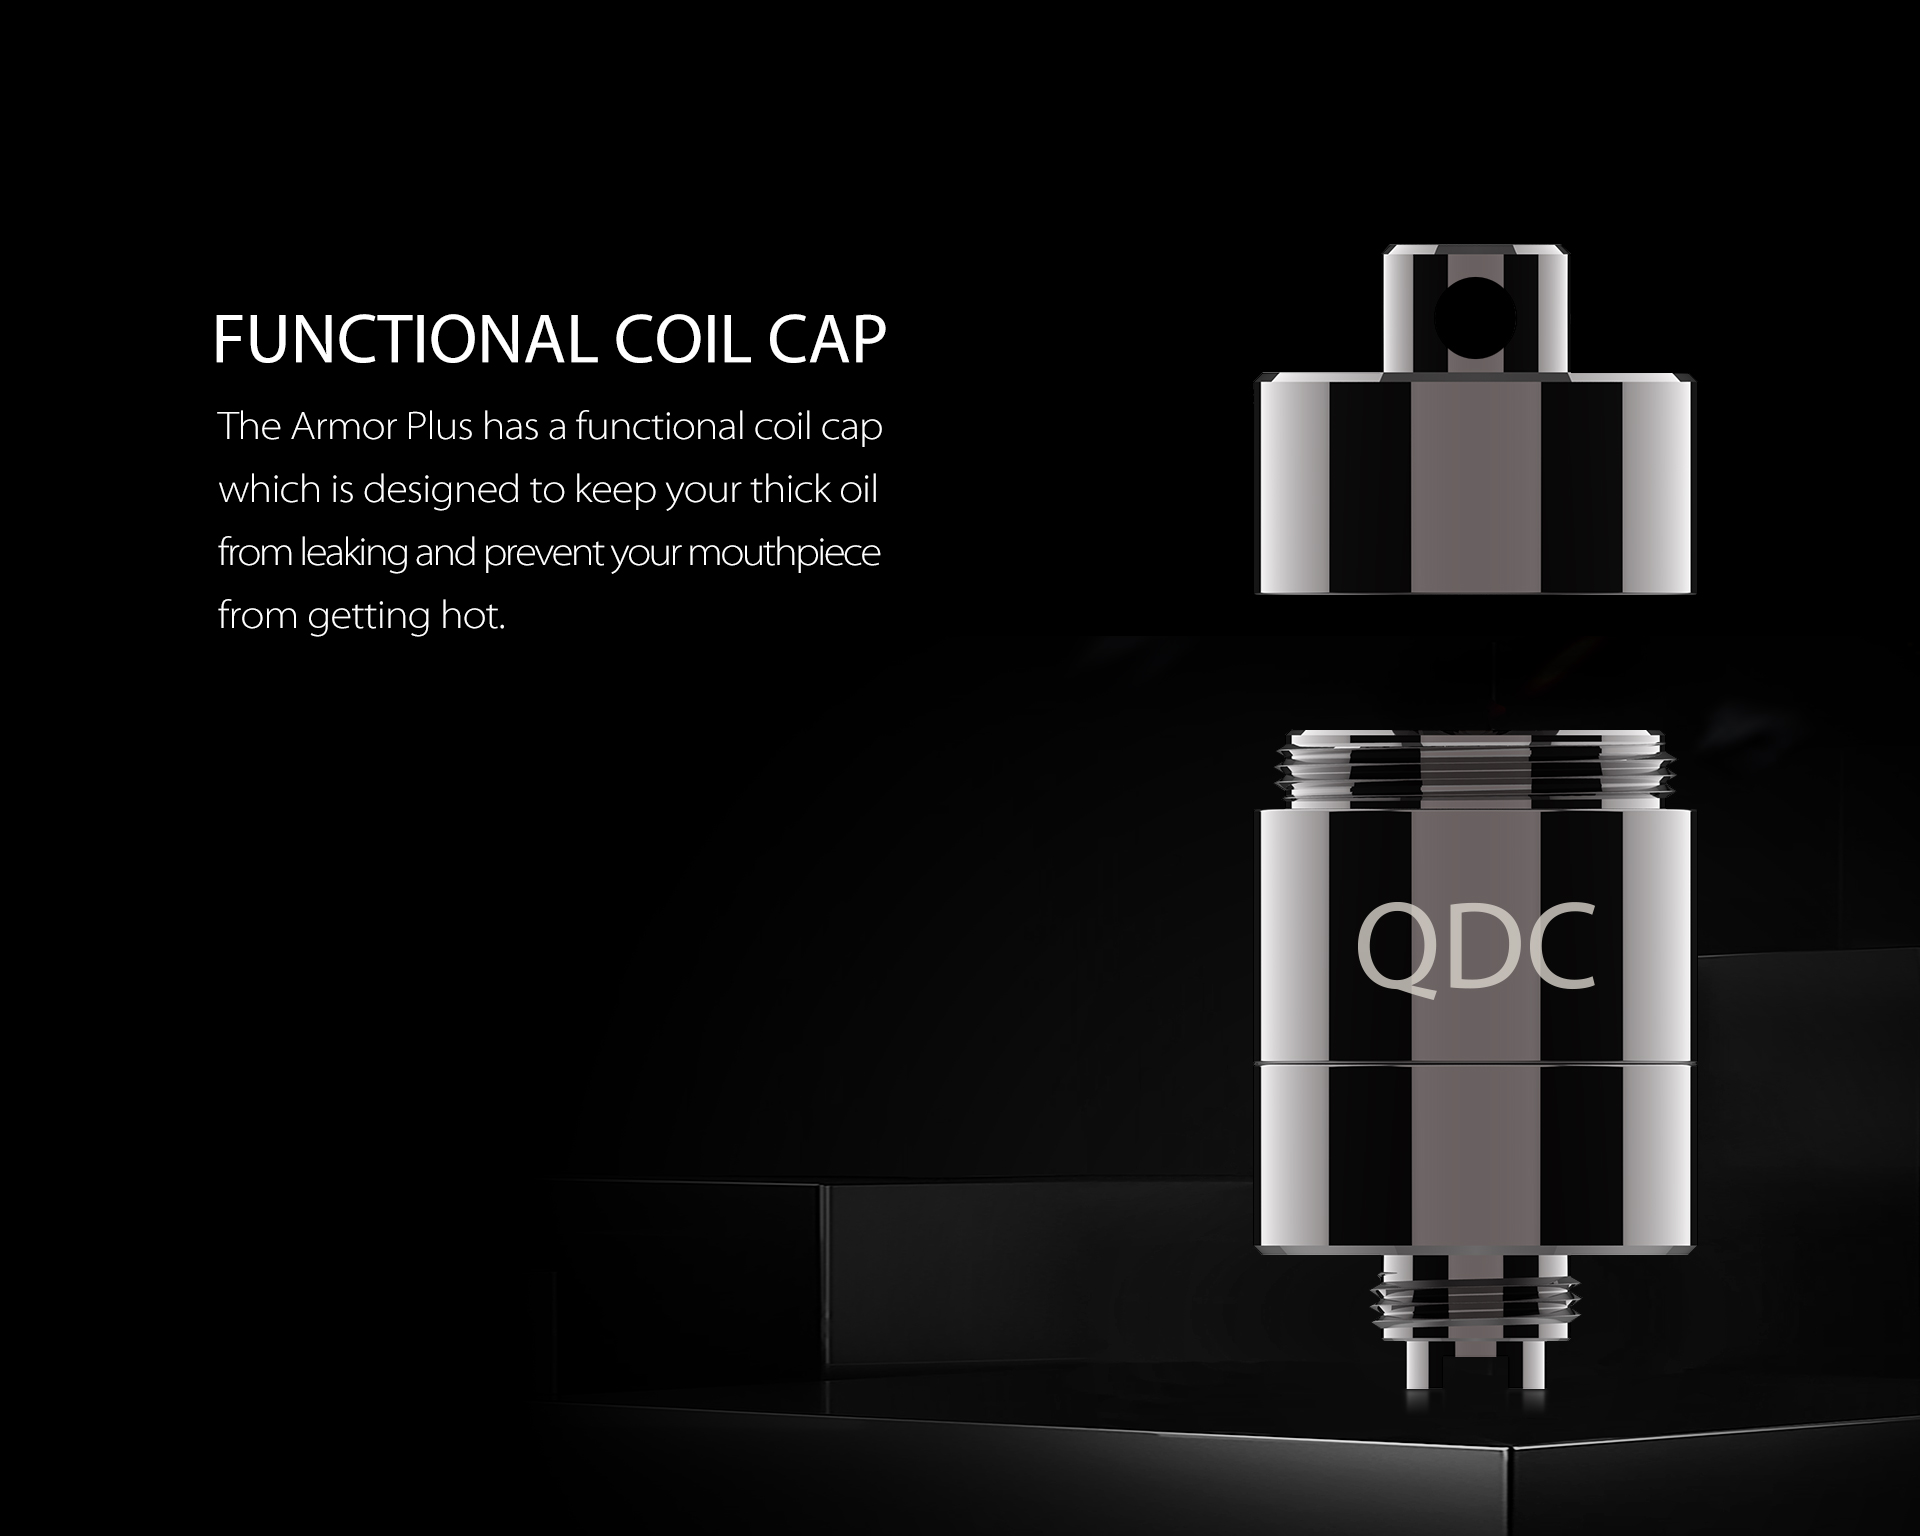 Yocan Armor Plus vape pen has a functional coil cap to avoid leaking.